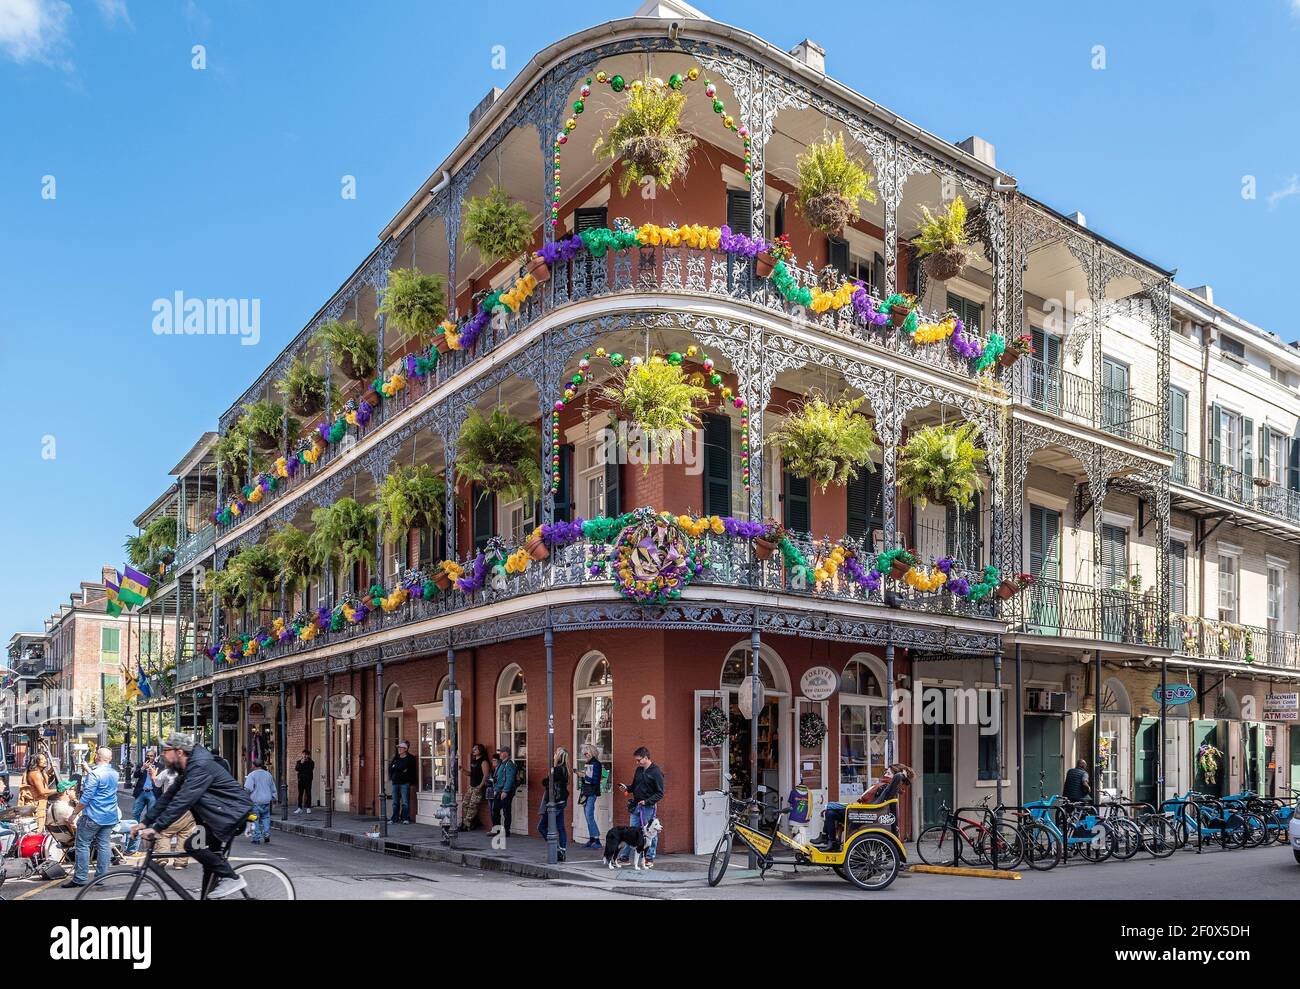 New Orleans Mardi Gras decorations on balconies in the French Quarter, corner of Royal Street and St Peter. Stock Photo